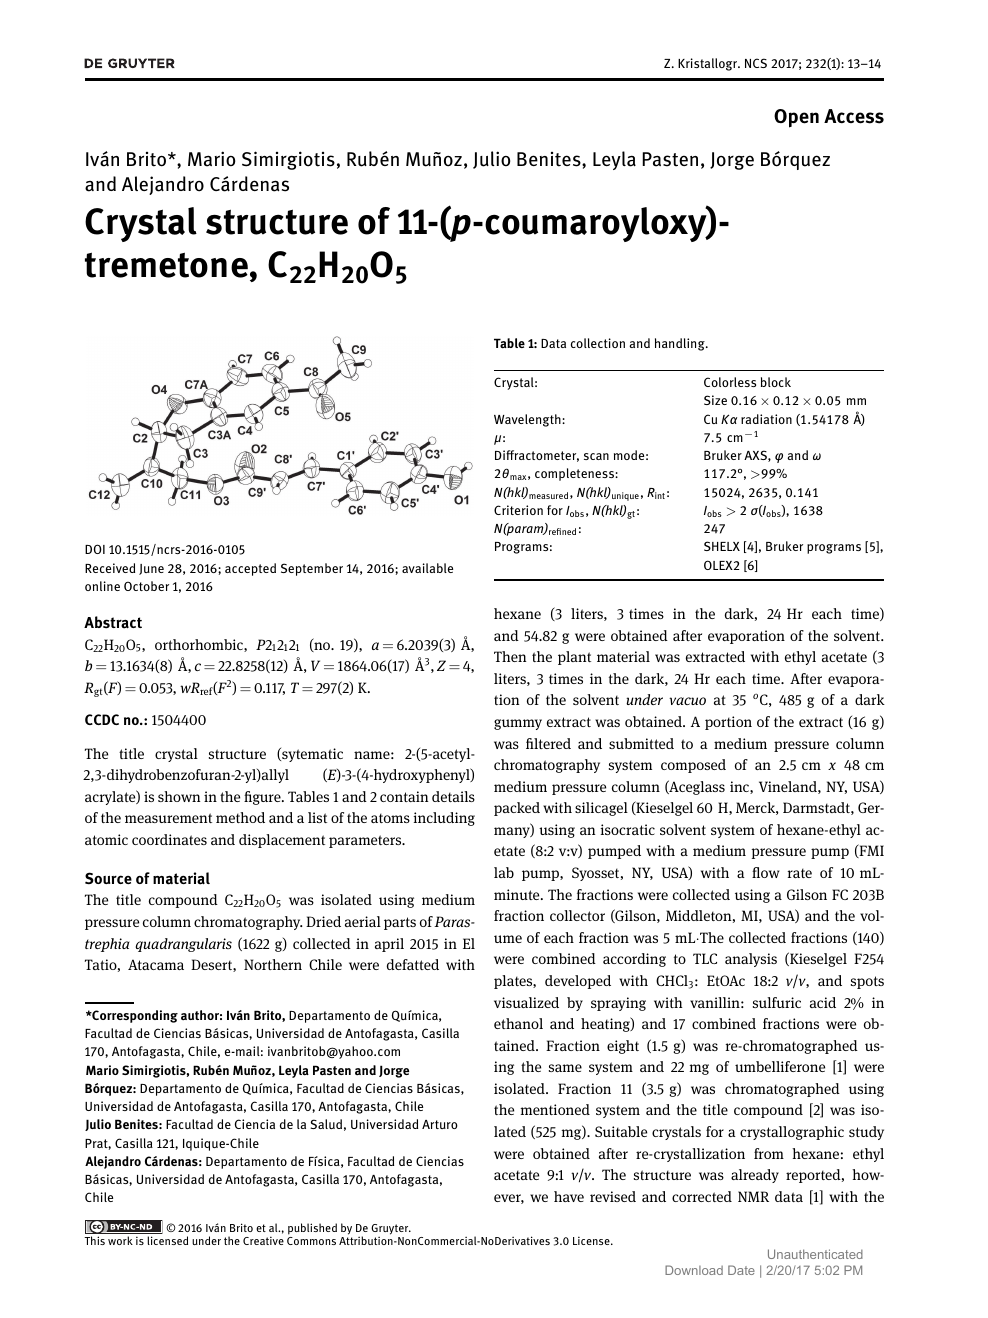 Crystal Structure Of 11 P Coumaroyloxy Tremetone C22ho5 Topic Of Research Paper In Biological Sciences Download Scholarly Article Pdf And Read For Free On Cyberleninka Open Science Hub